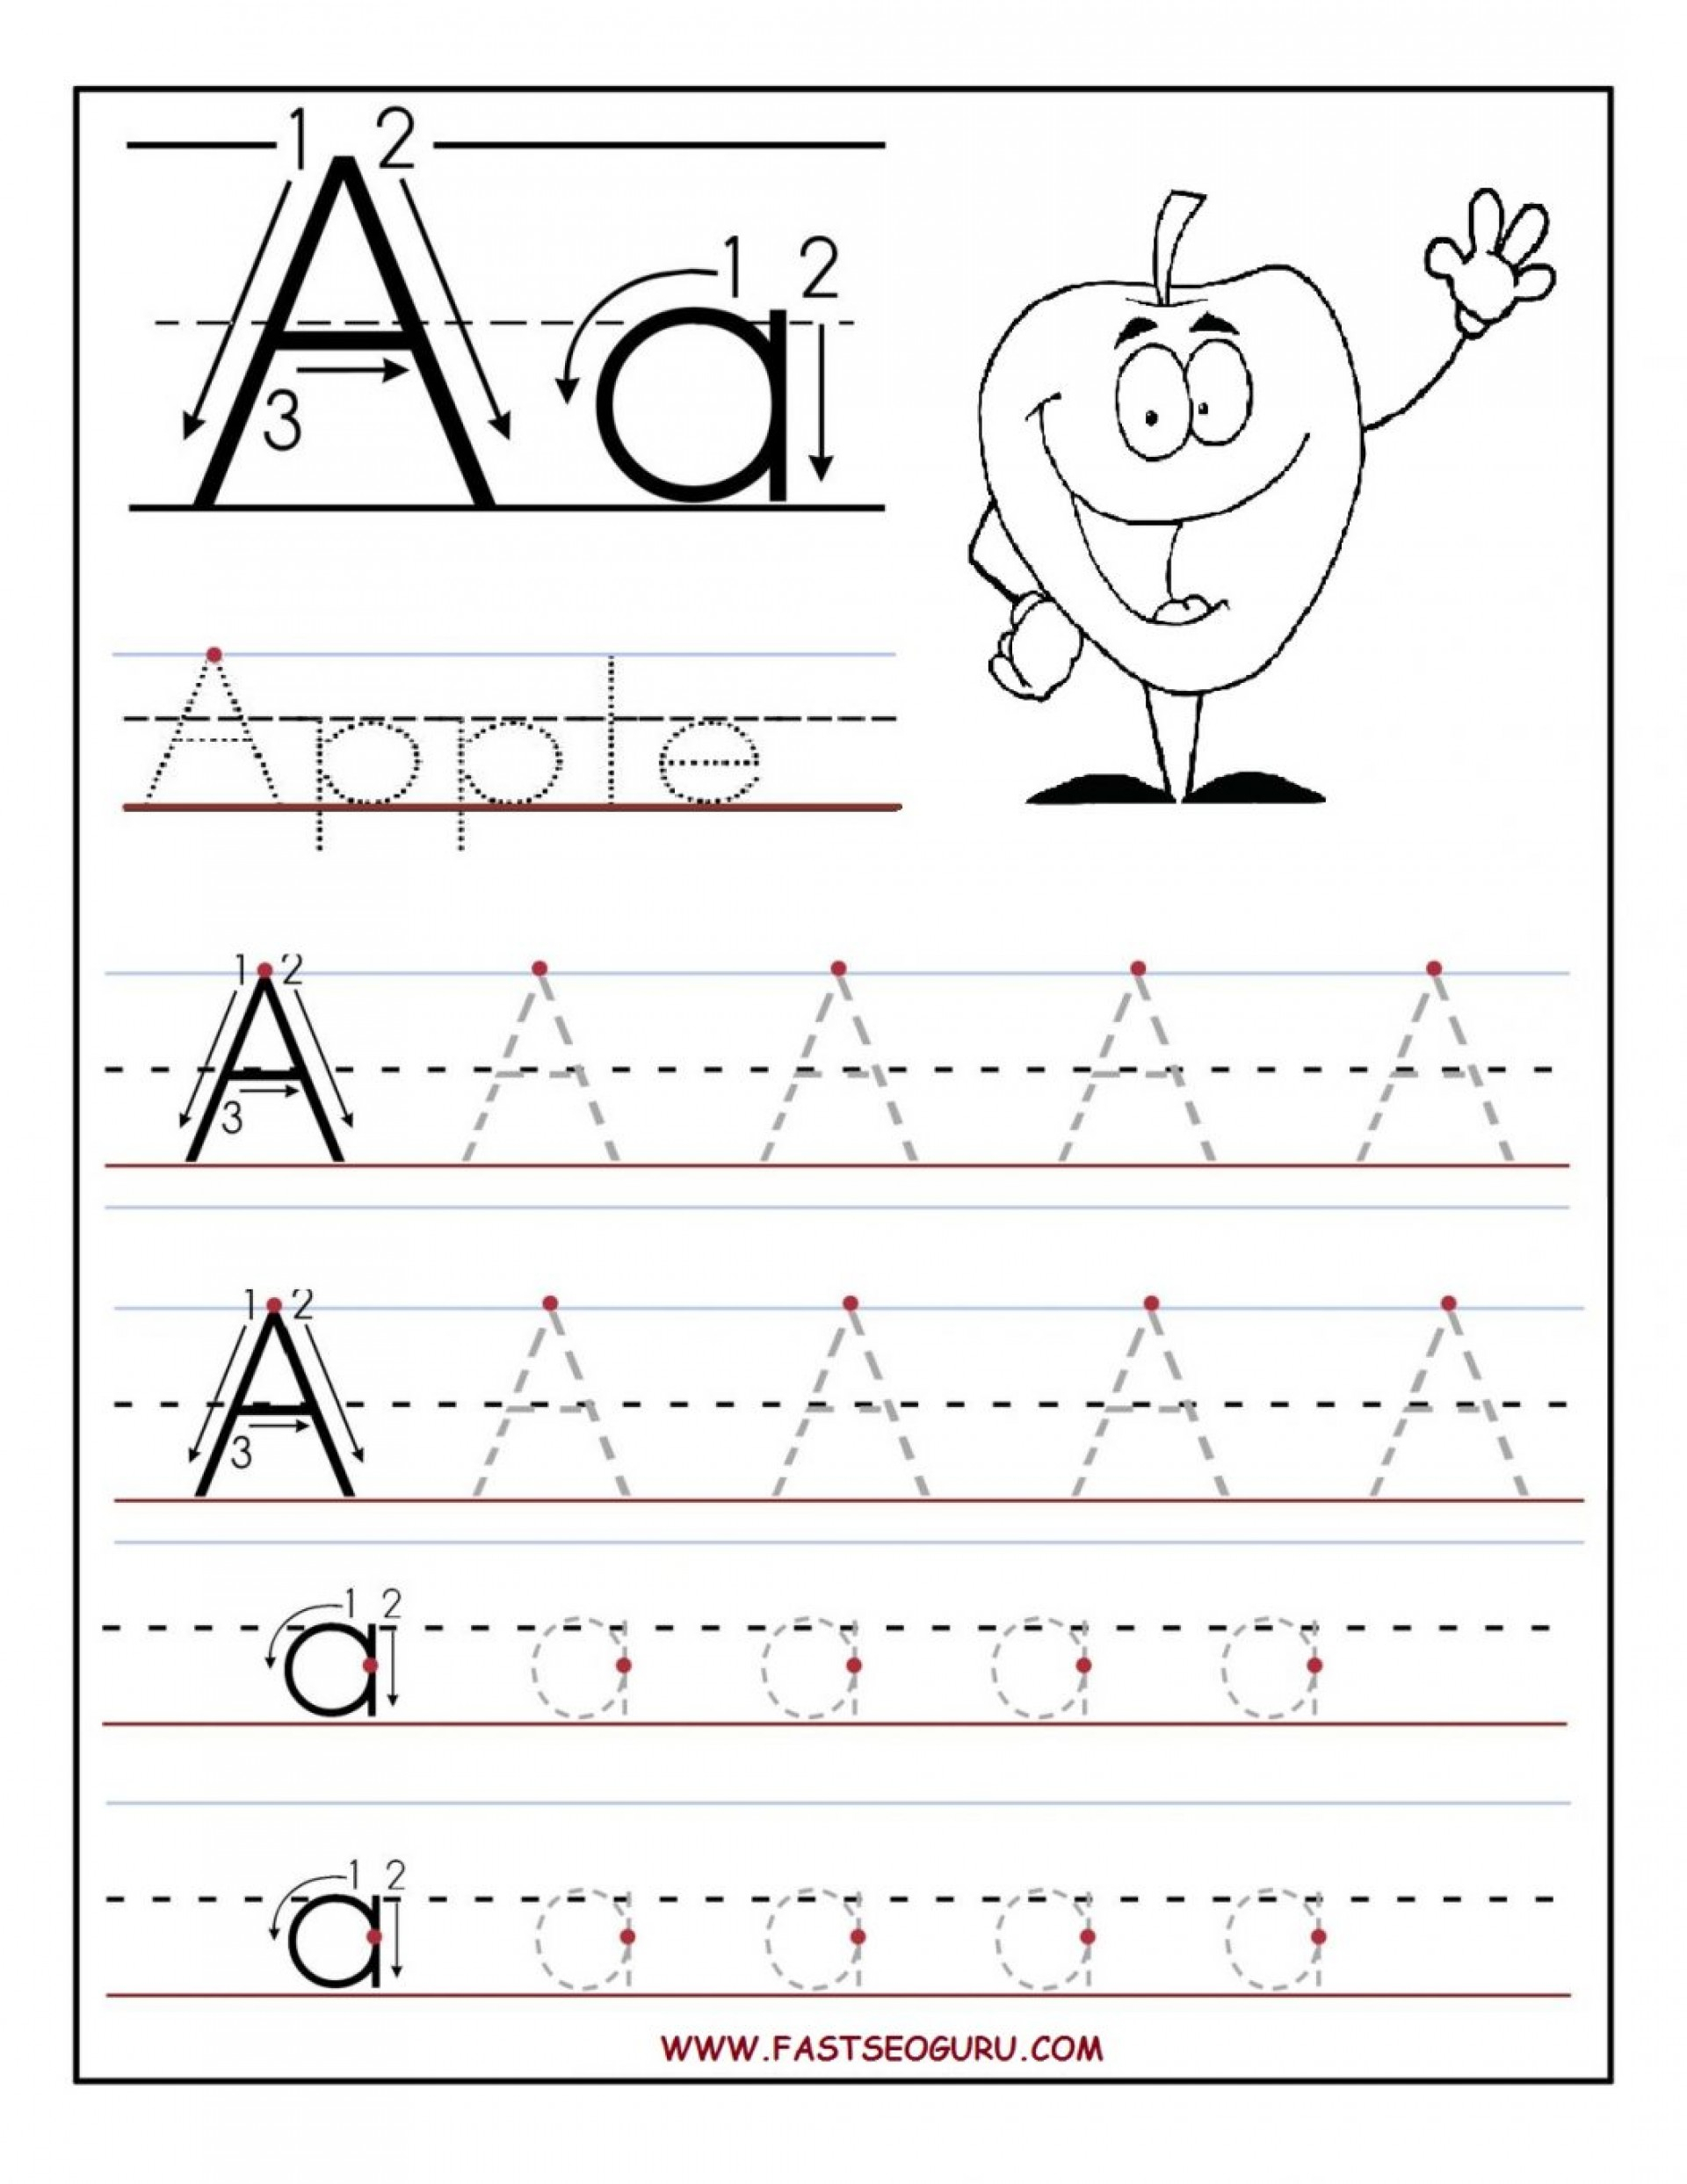 Coloring Book : Free Printable Tracingts For Kindergarten intended for Tracing Letters For Kindergarten Free